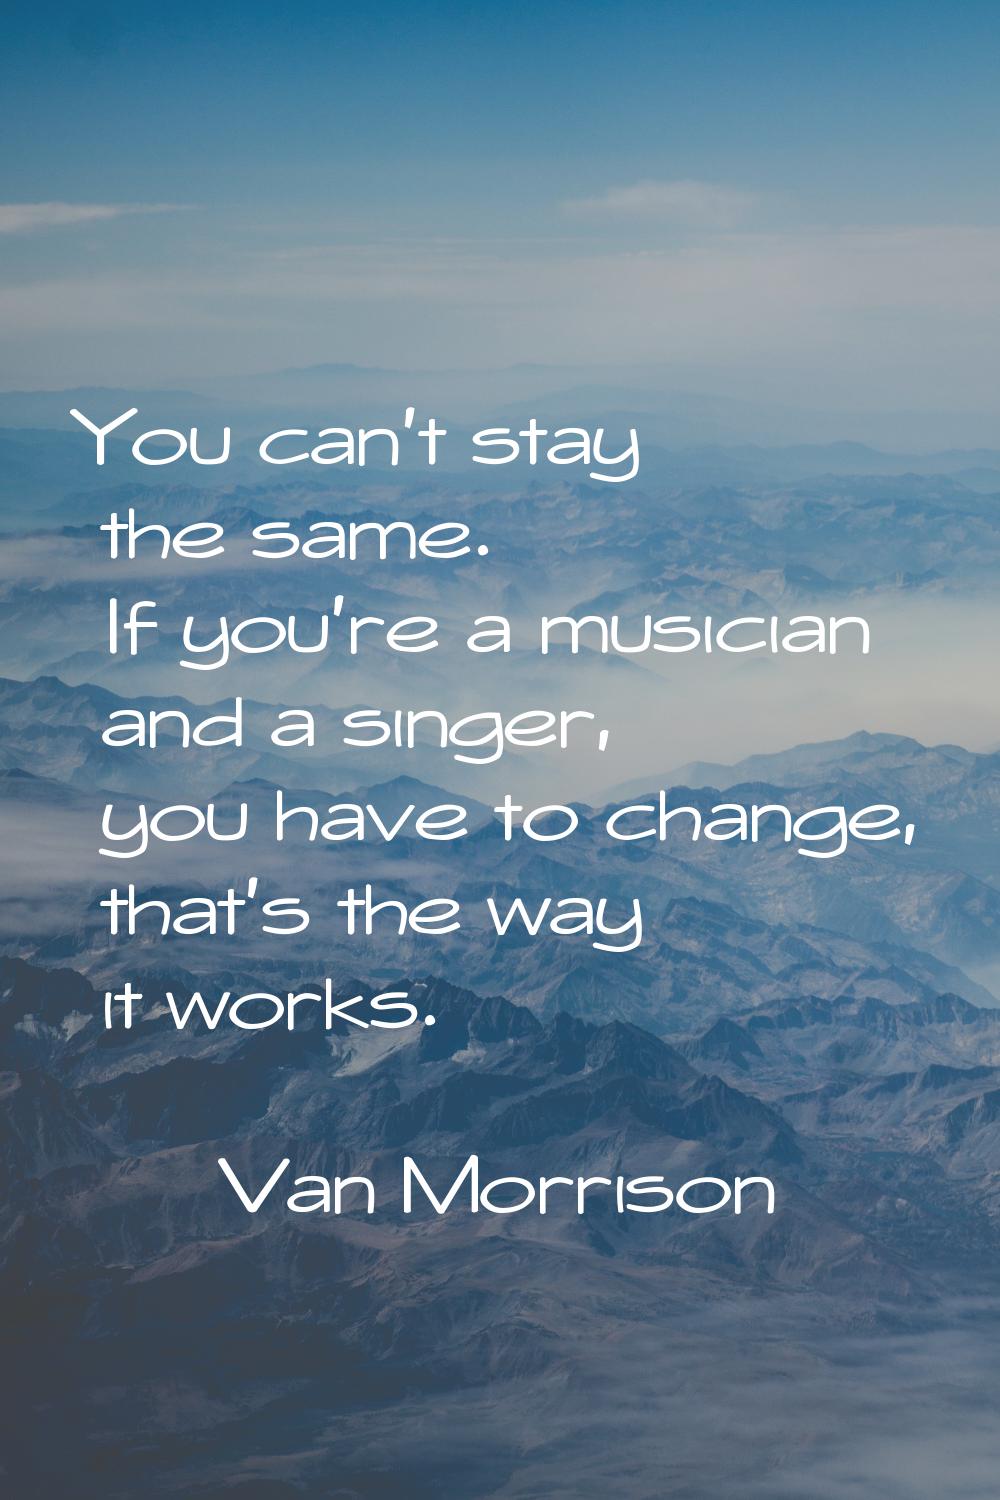 You can't stay the same. If you're a musician and a singer, you have to change, that's the way it w